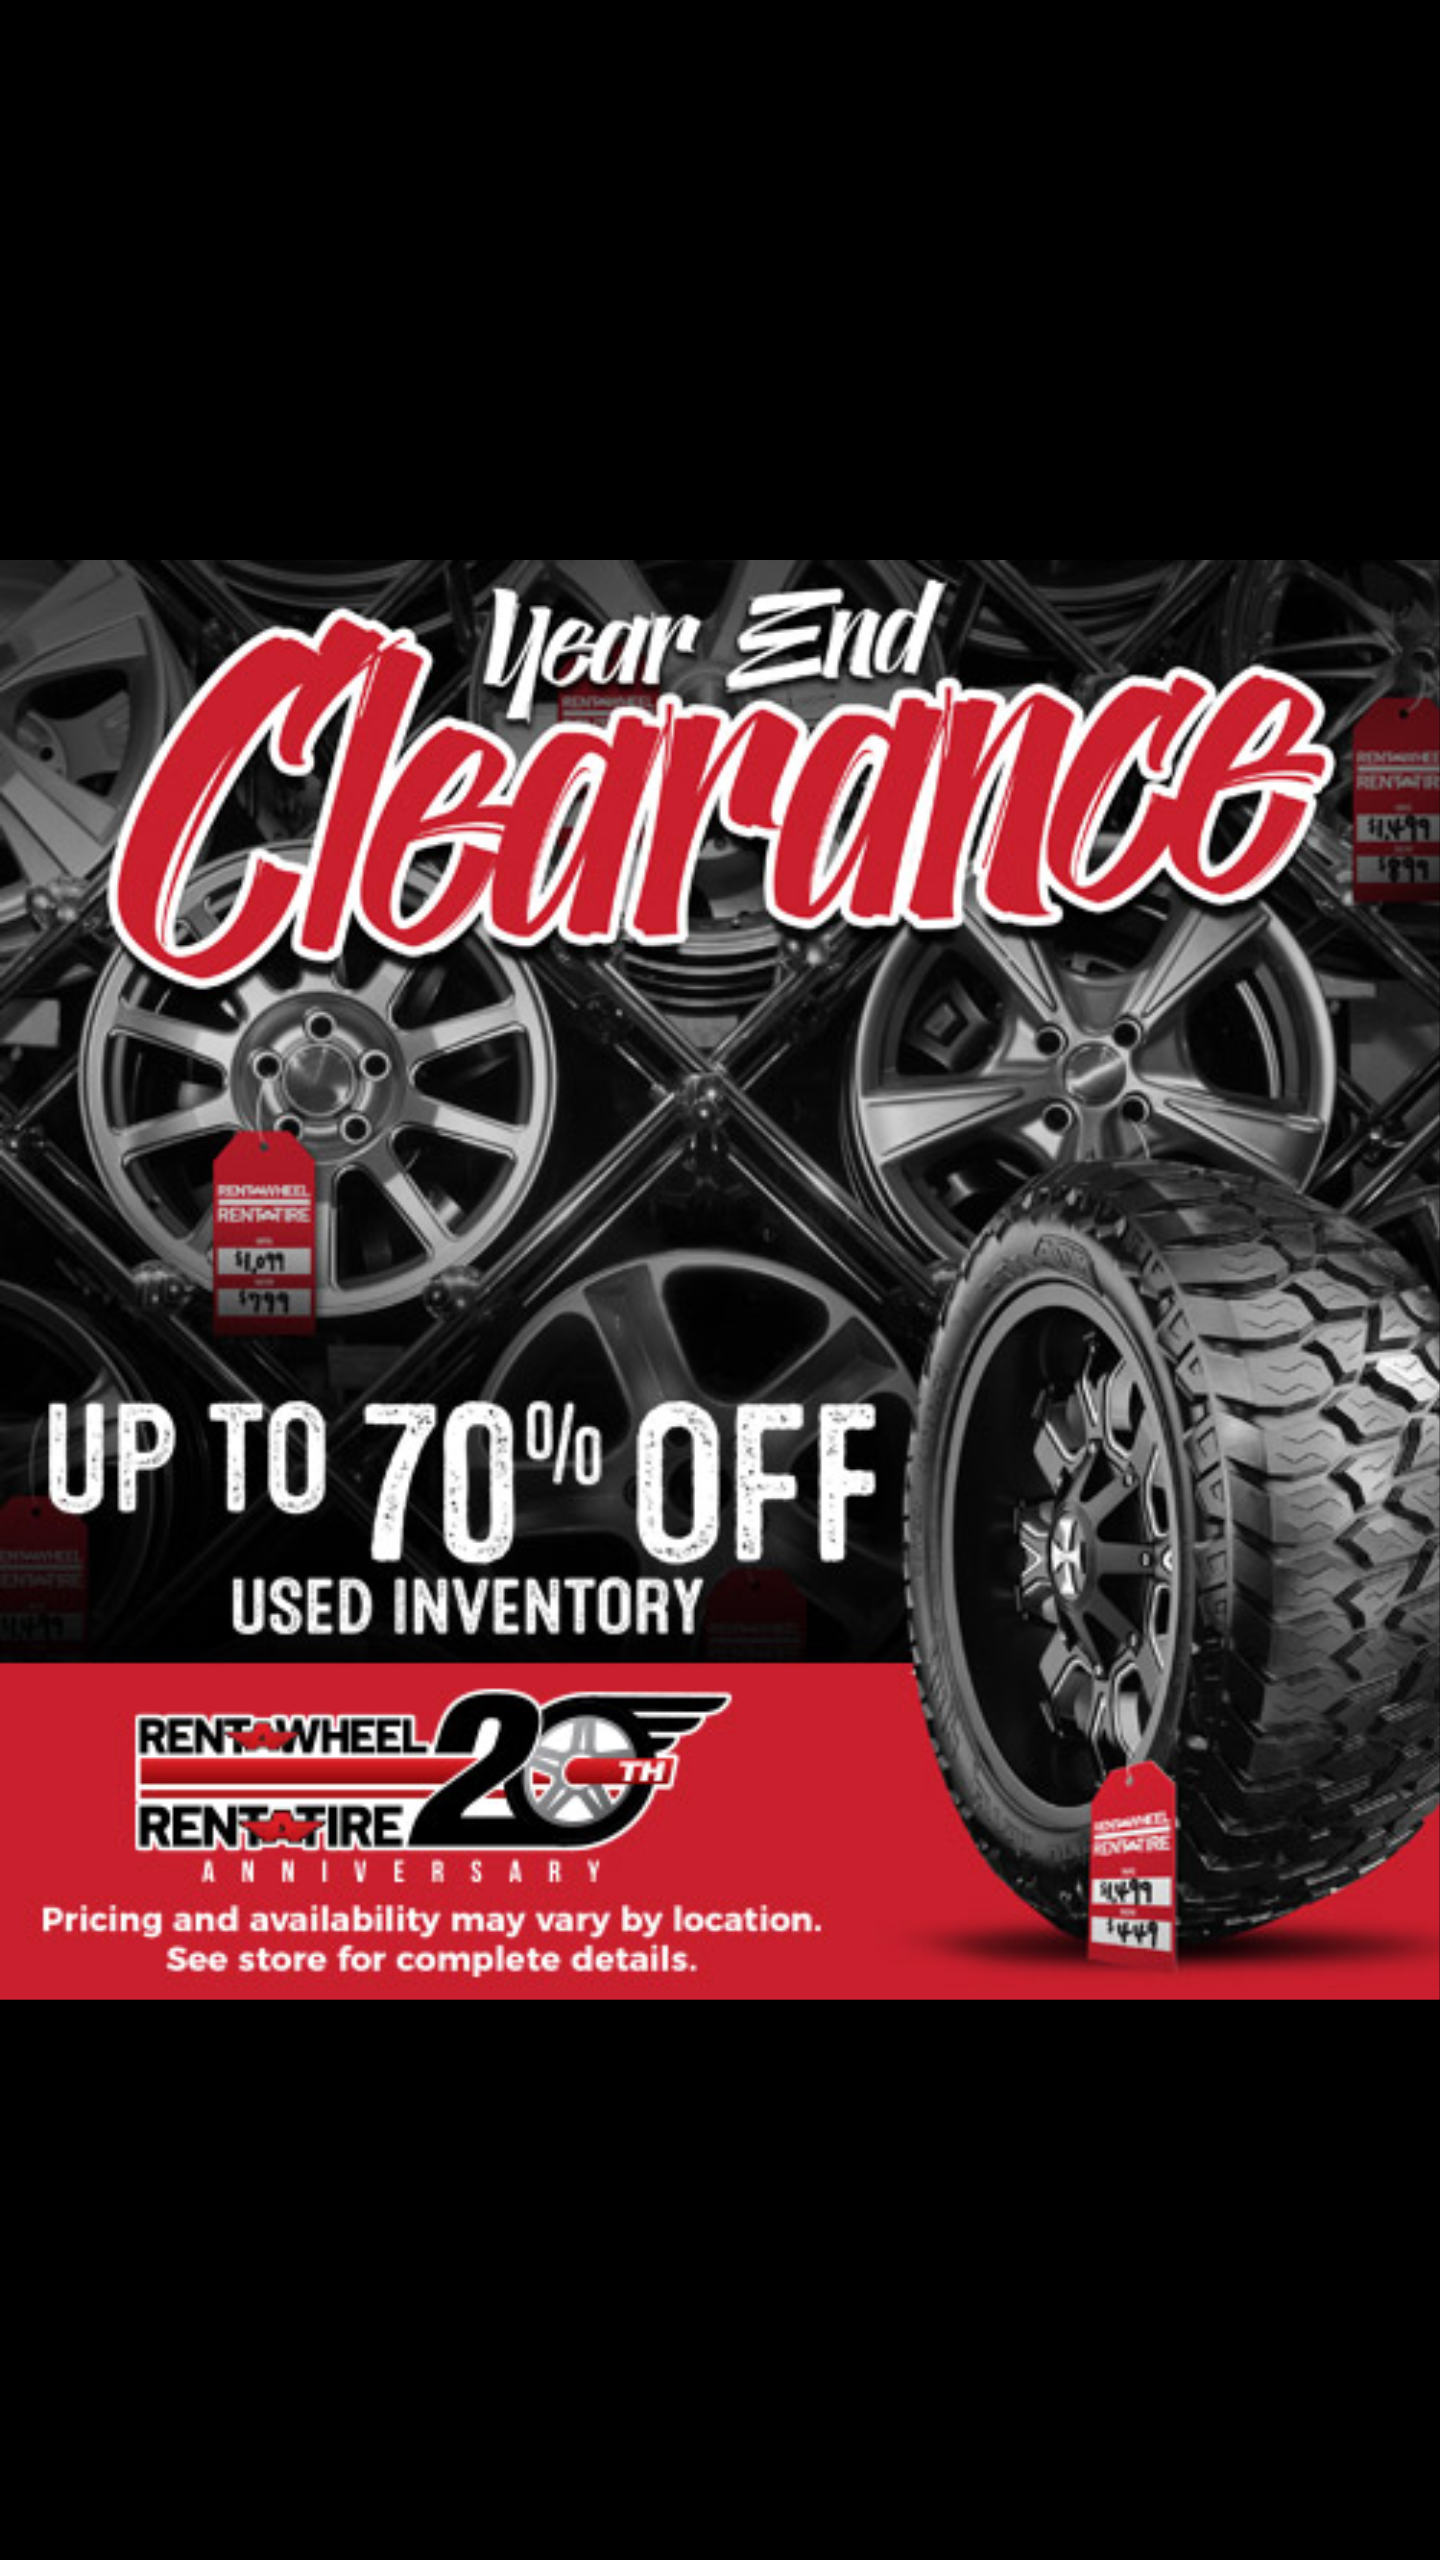 YEAR END CLEARANCE EVENT!!